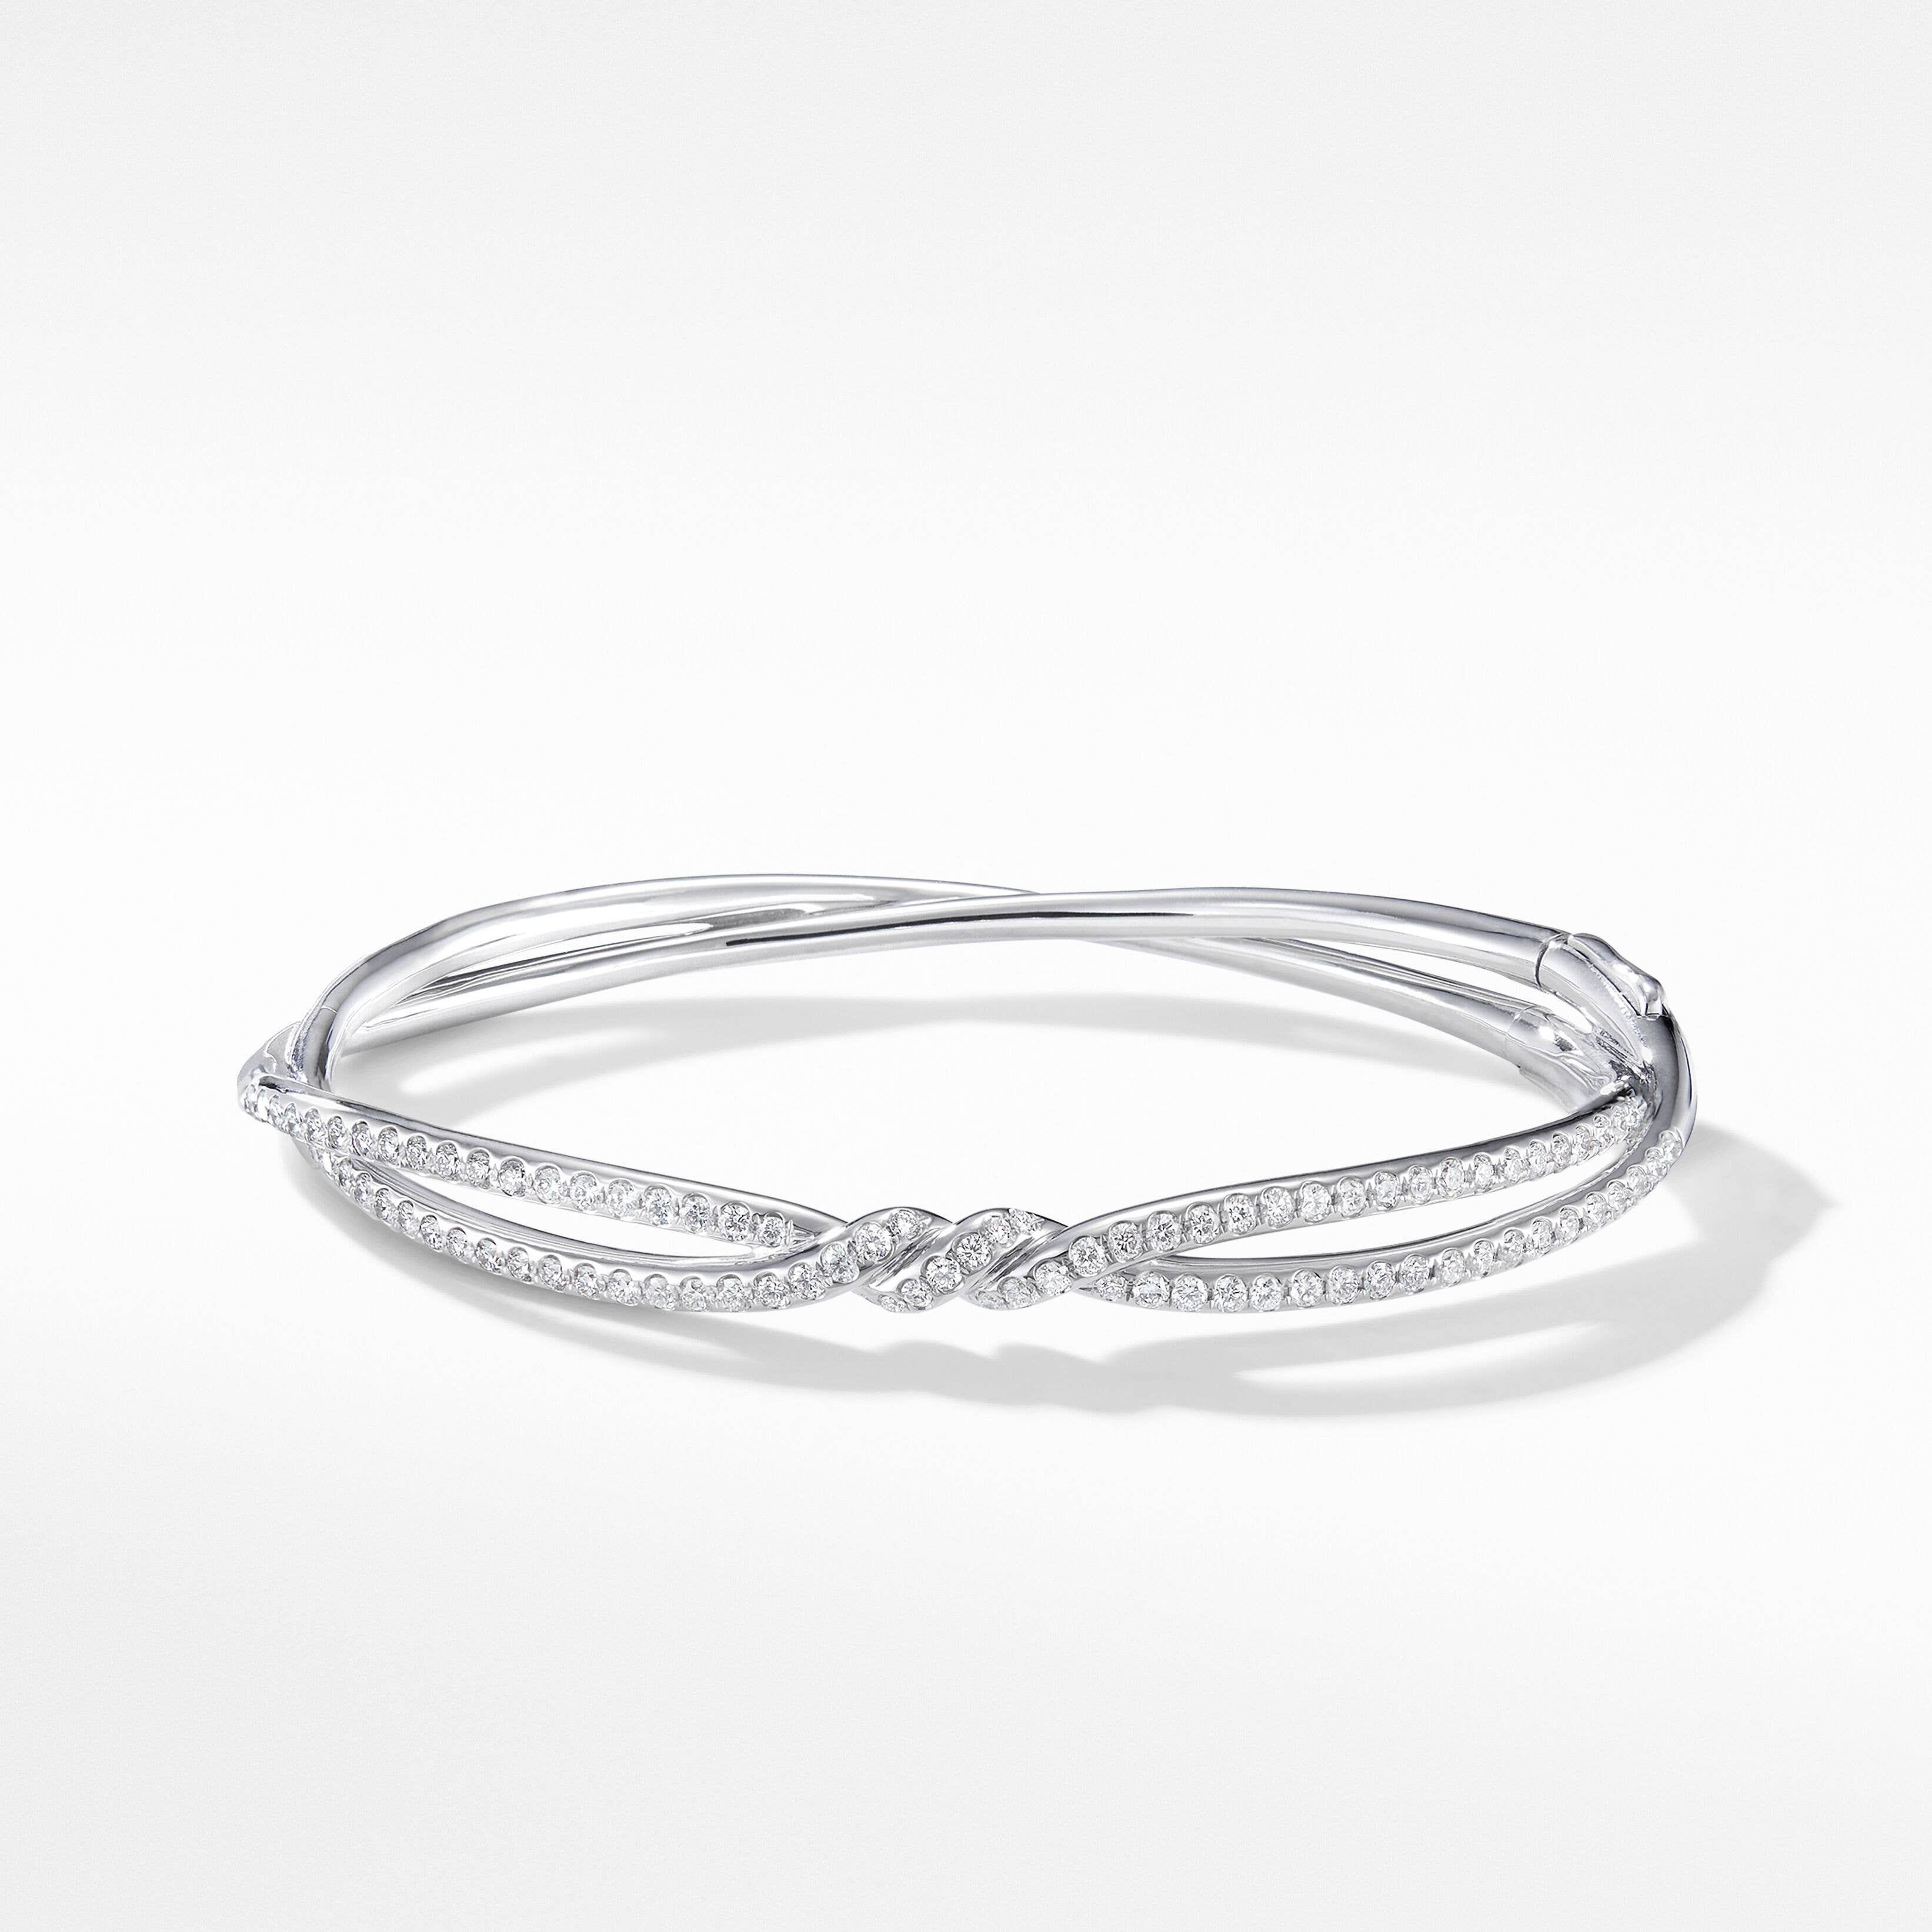 Continuance® Bracelet in 18K White Gold with Full Pavé Diamonds